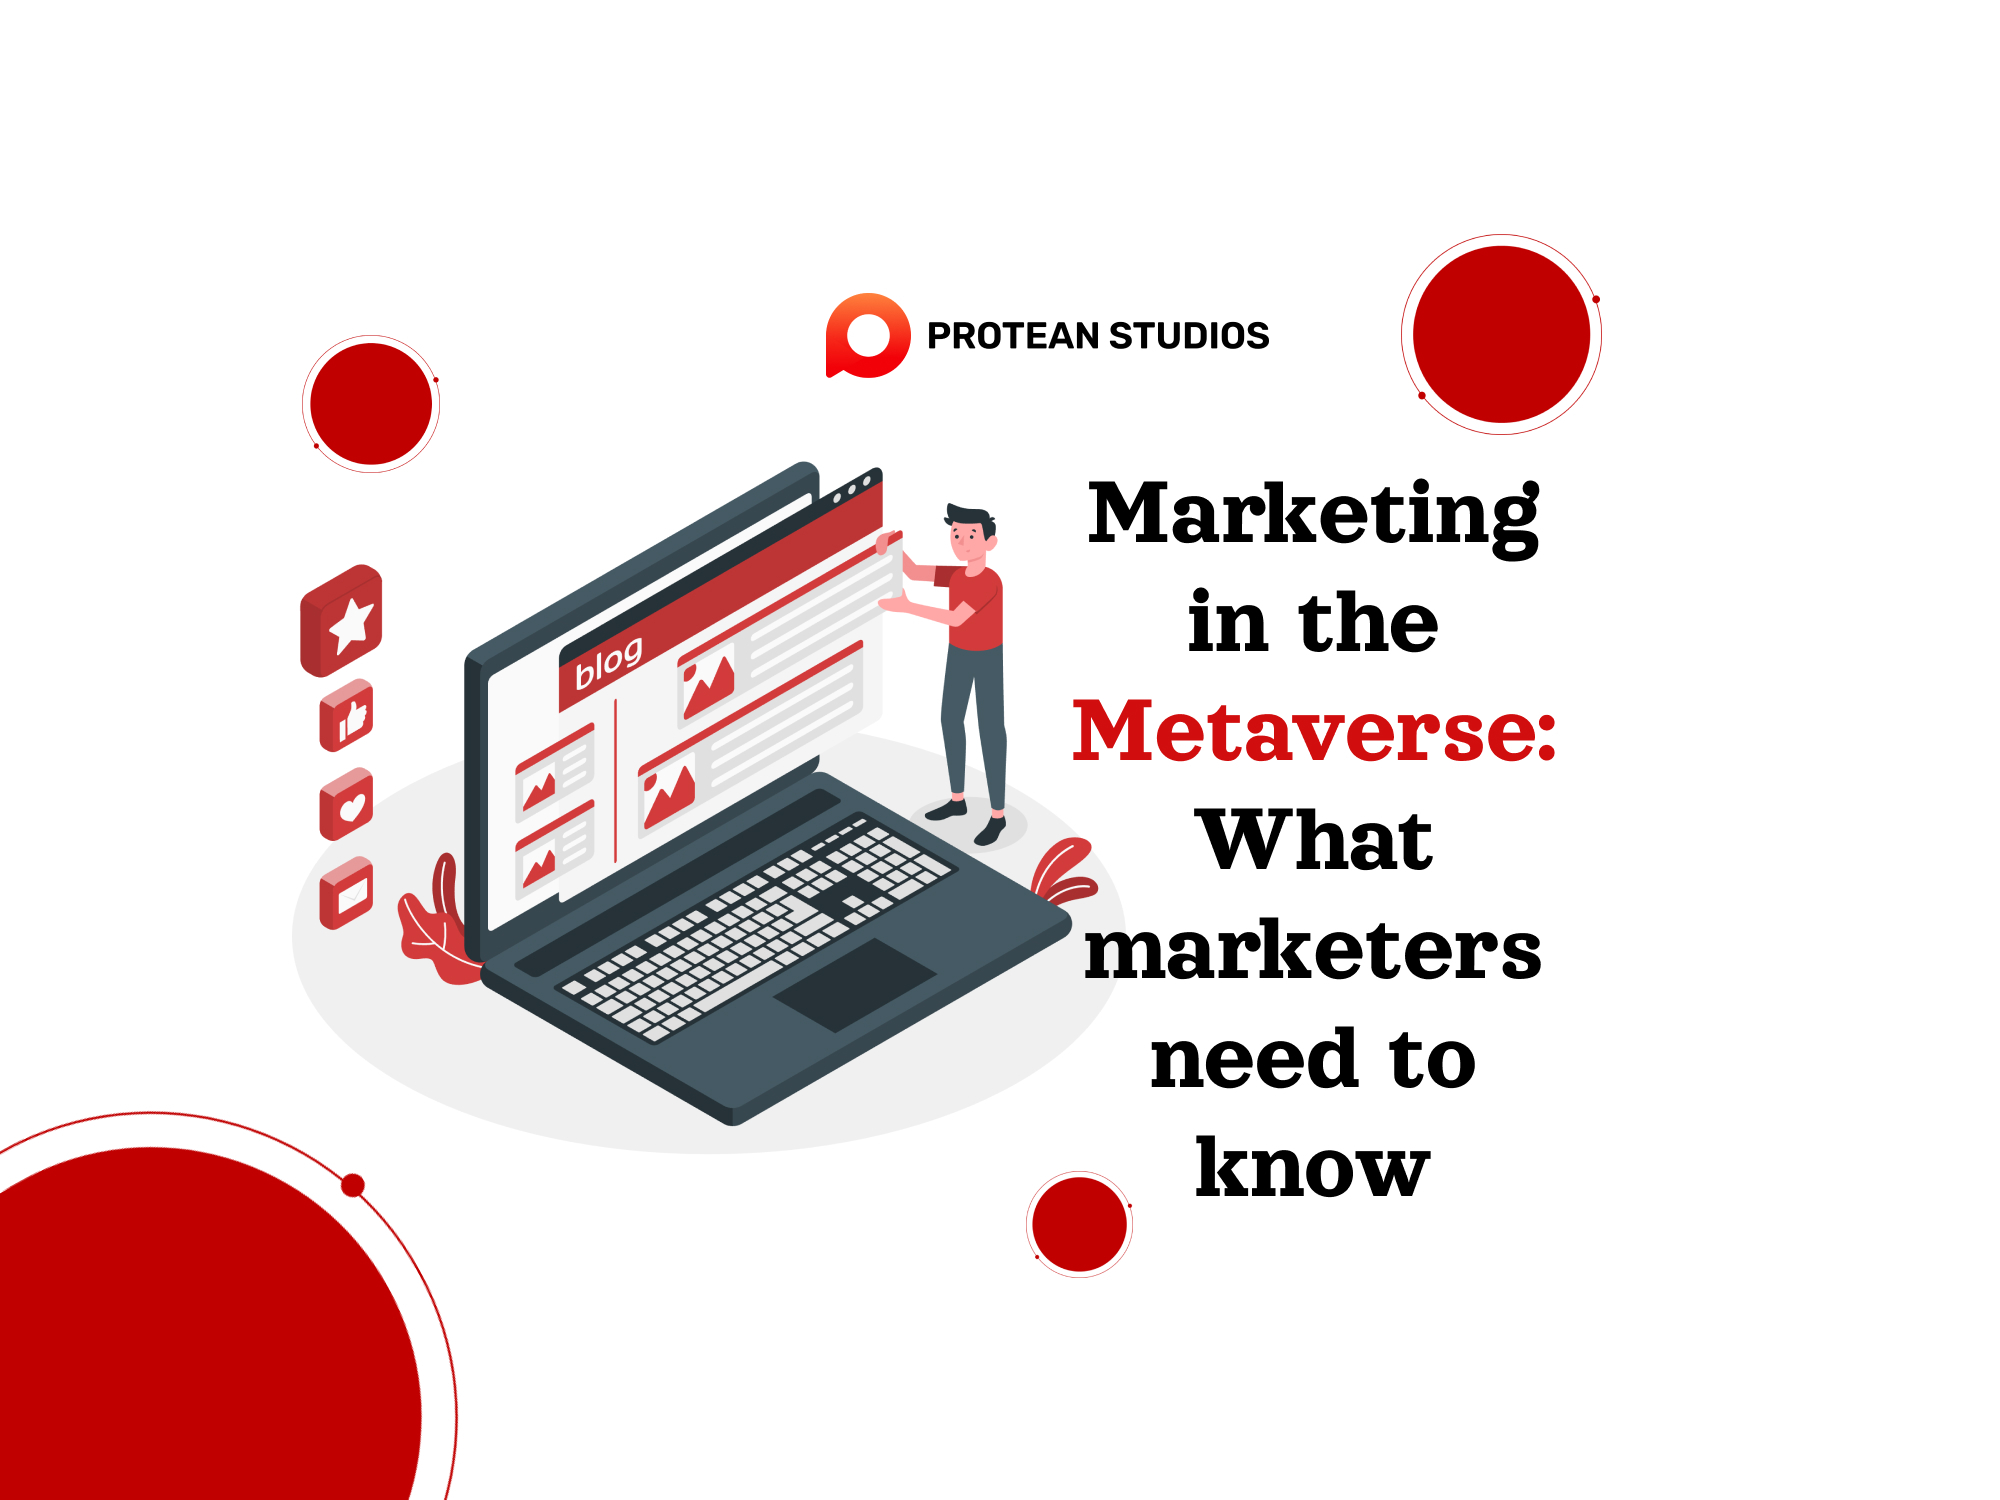 Marketing in the metaverse: What marketers need to know